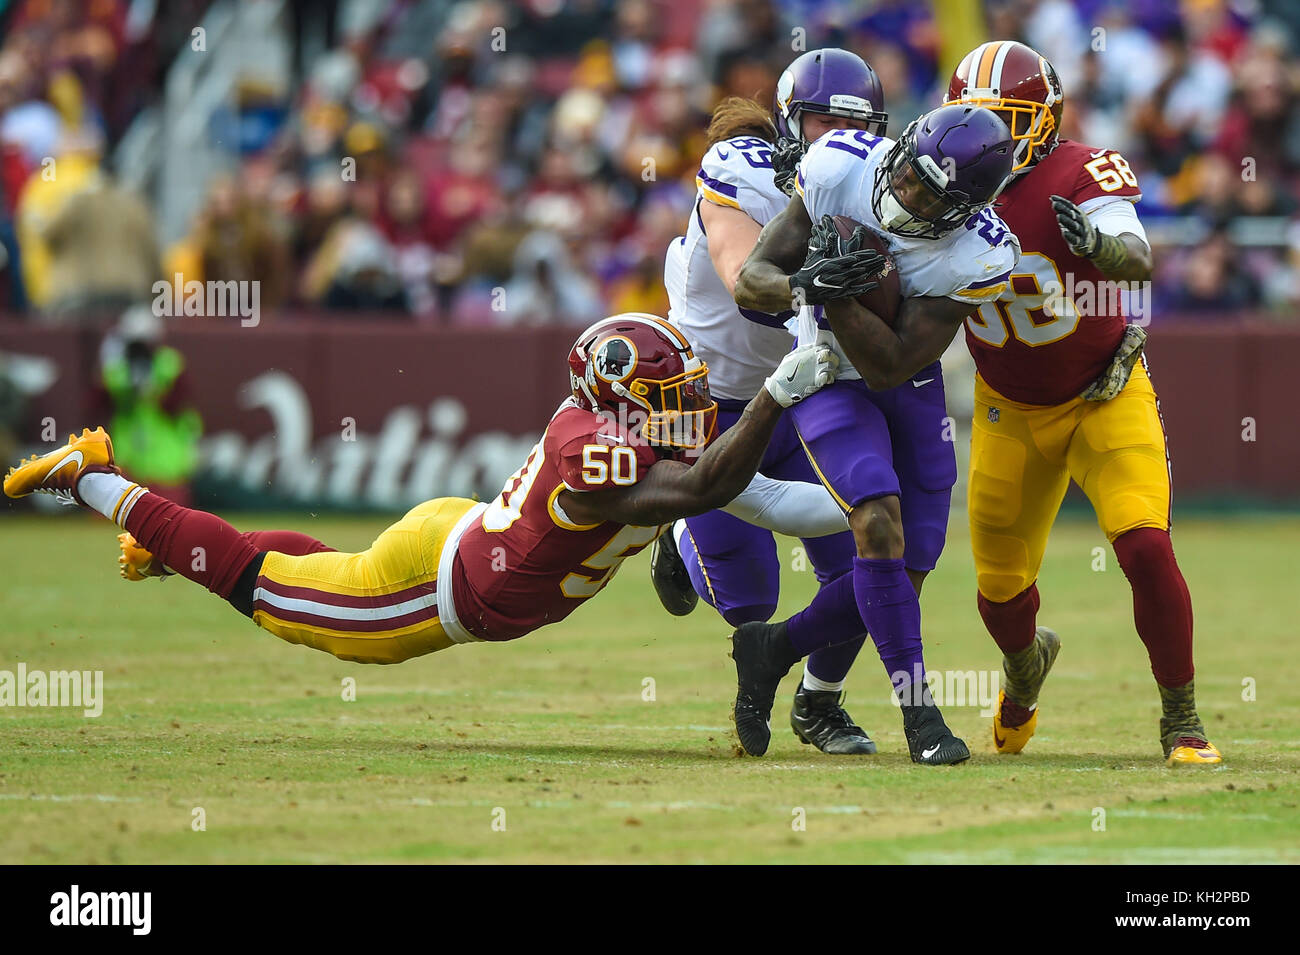 Landover, MD, USA. 12th Nov, 2017. Washington Redskins linebacker Martrell Spaight (50) and linebacker Junior Galette (58) try to bring down Minnesota Vikings running back Jerick McKinnon (21) during the matchup between the Minnesota Vikings and the Washington Redskins at FedEx Field in Landover, MD. Credit: csm/Alamy Live News Stock Photo